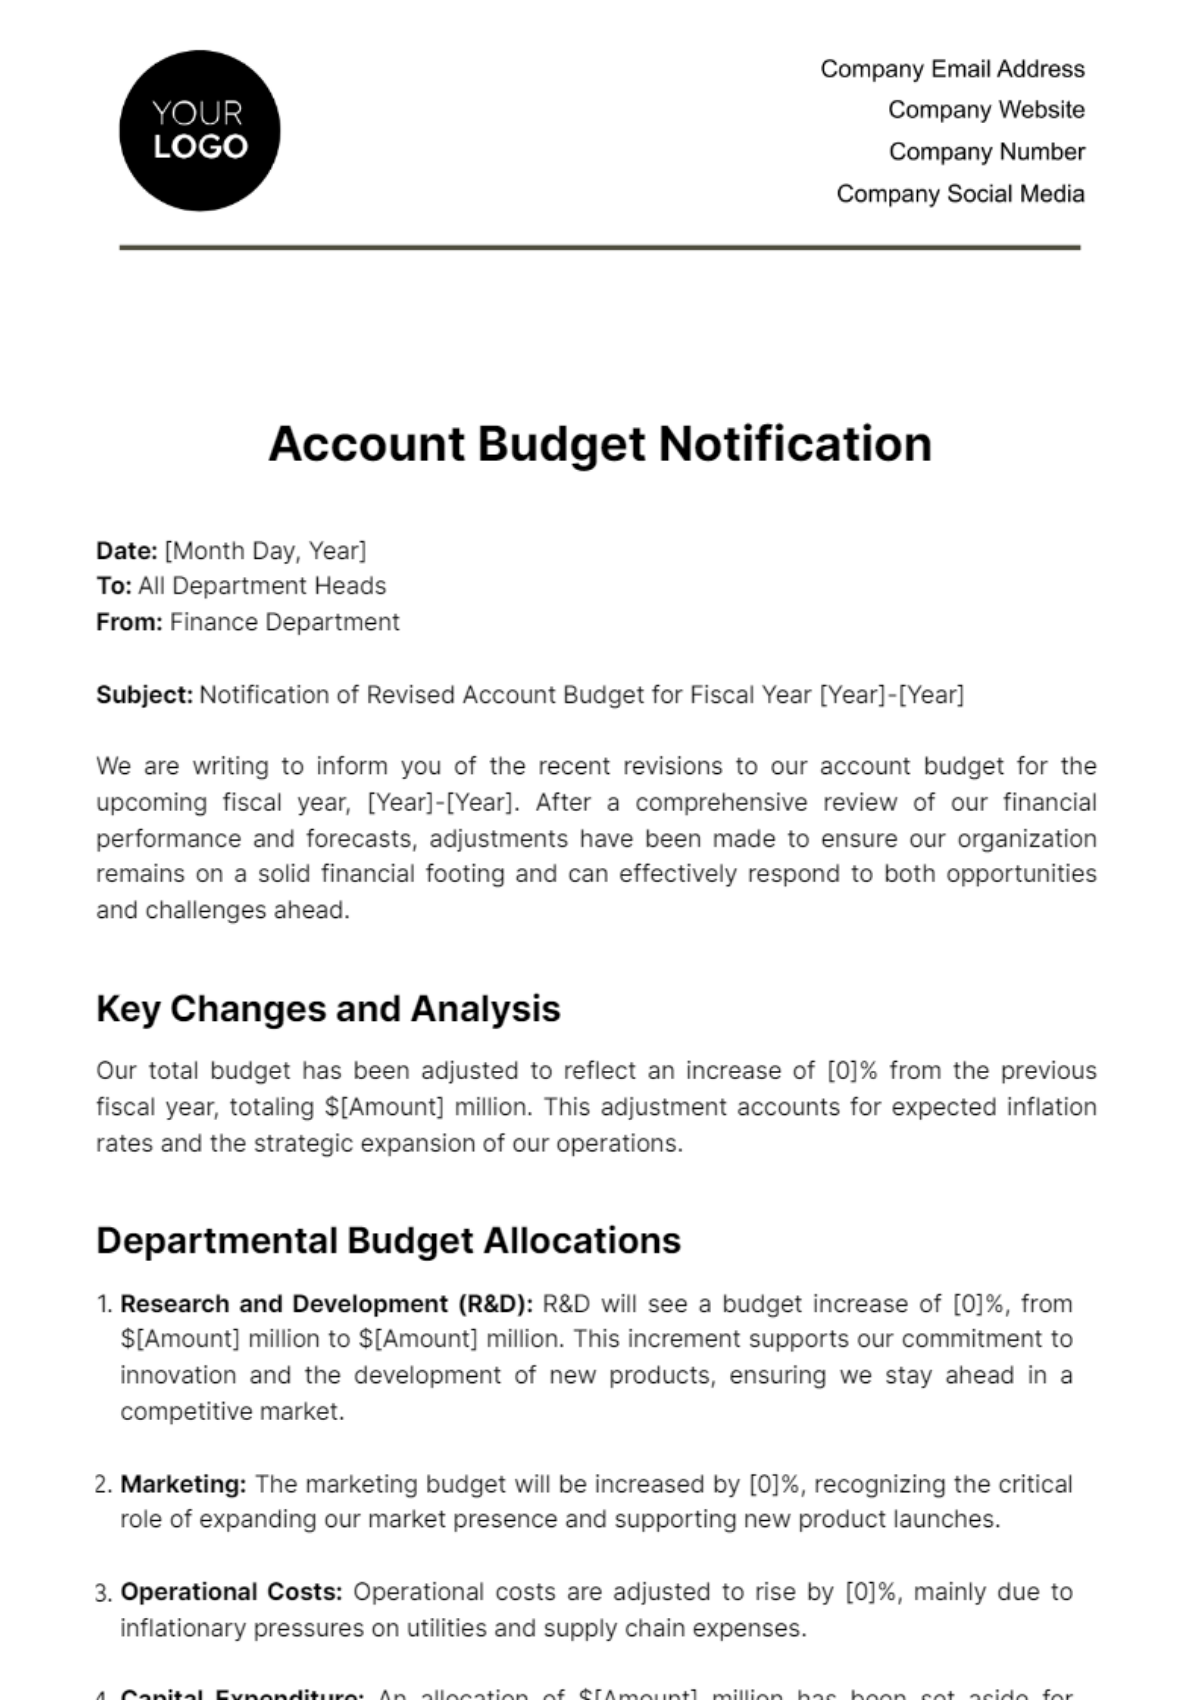 Account Budget Notification Template